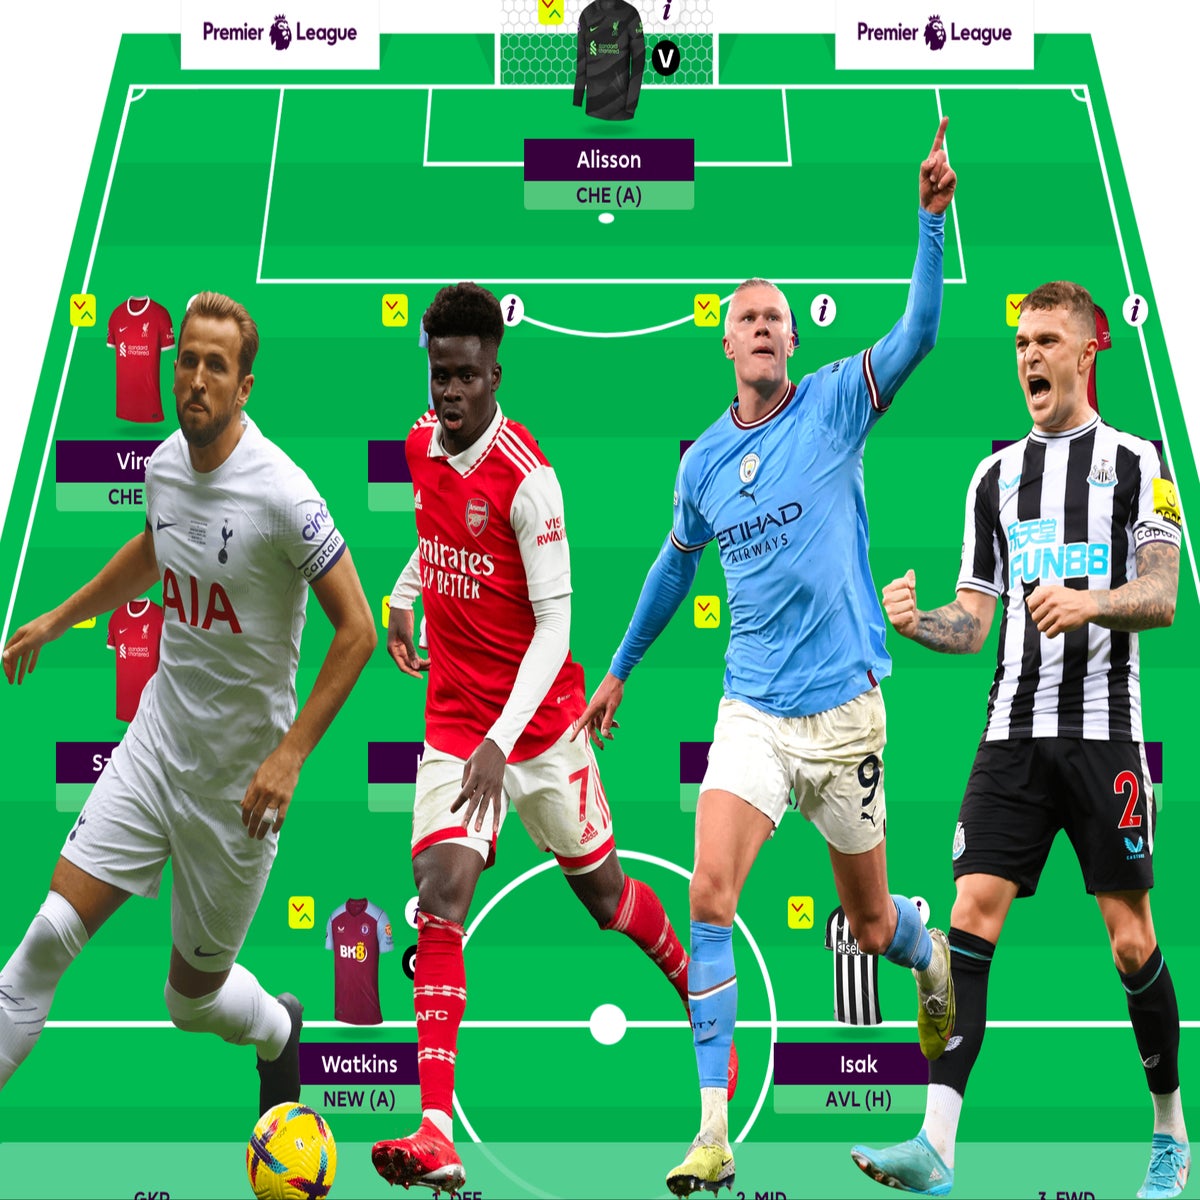 The best Fantasy Premier League team for Gameweek 1 of the 2023/24 season  according to AI